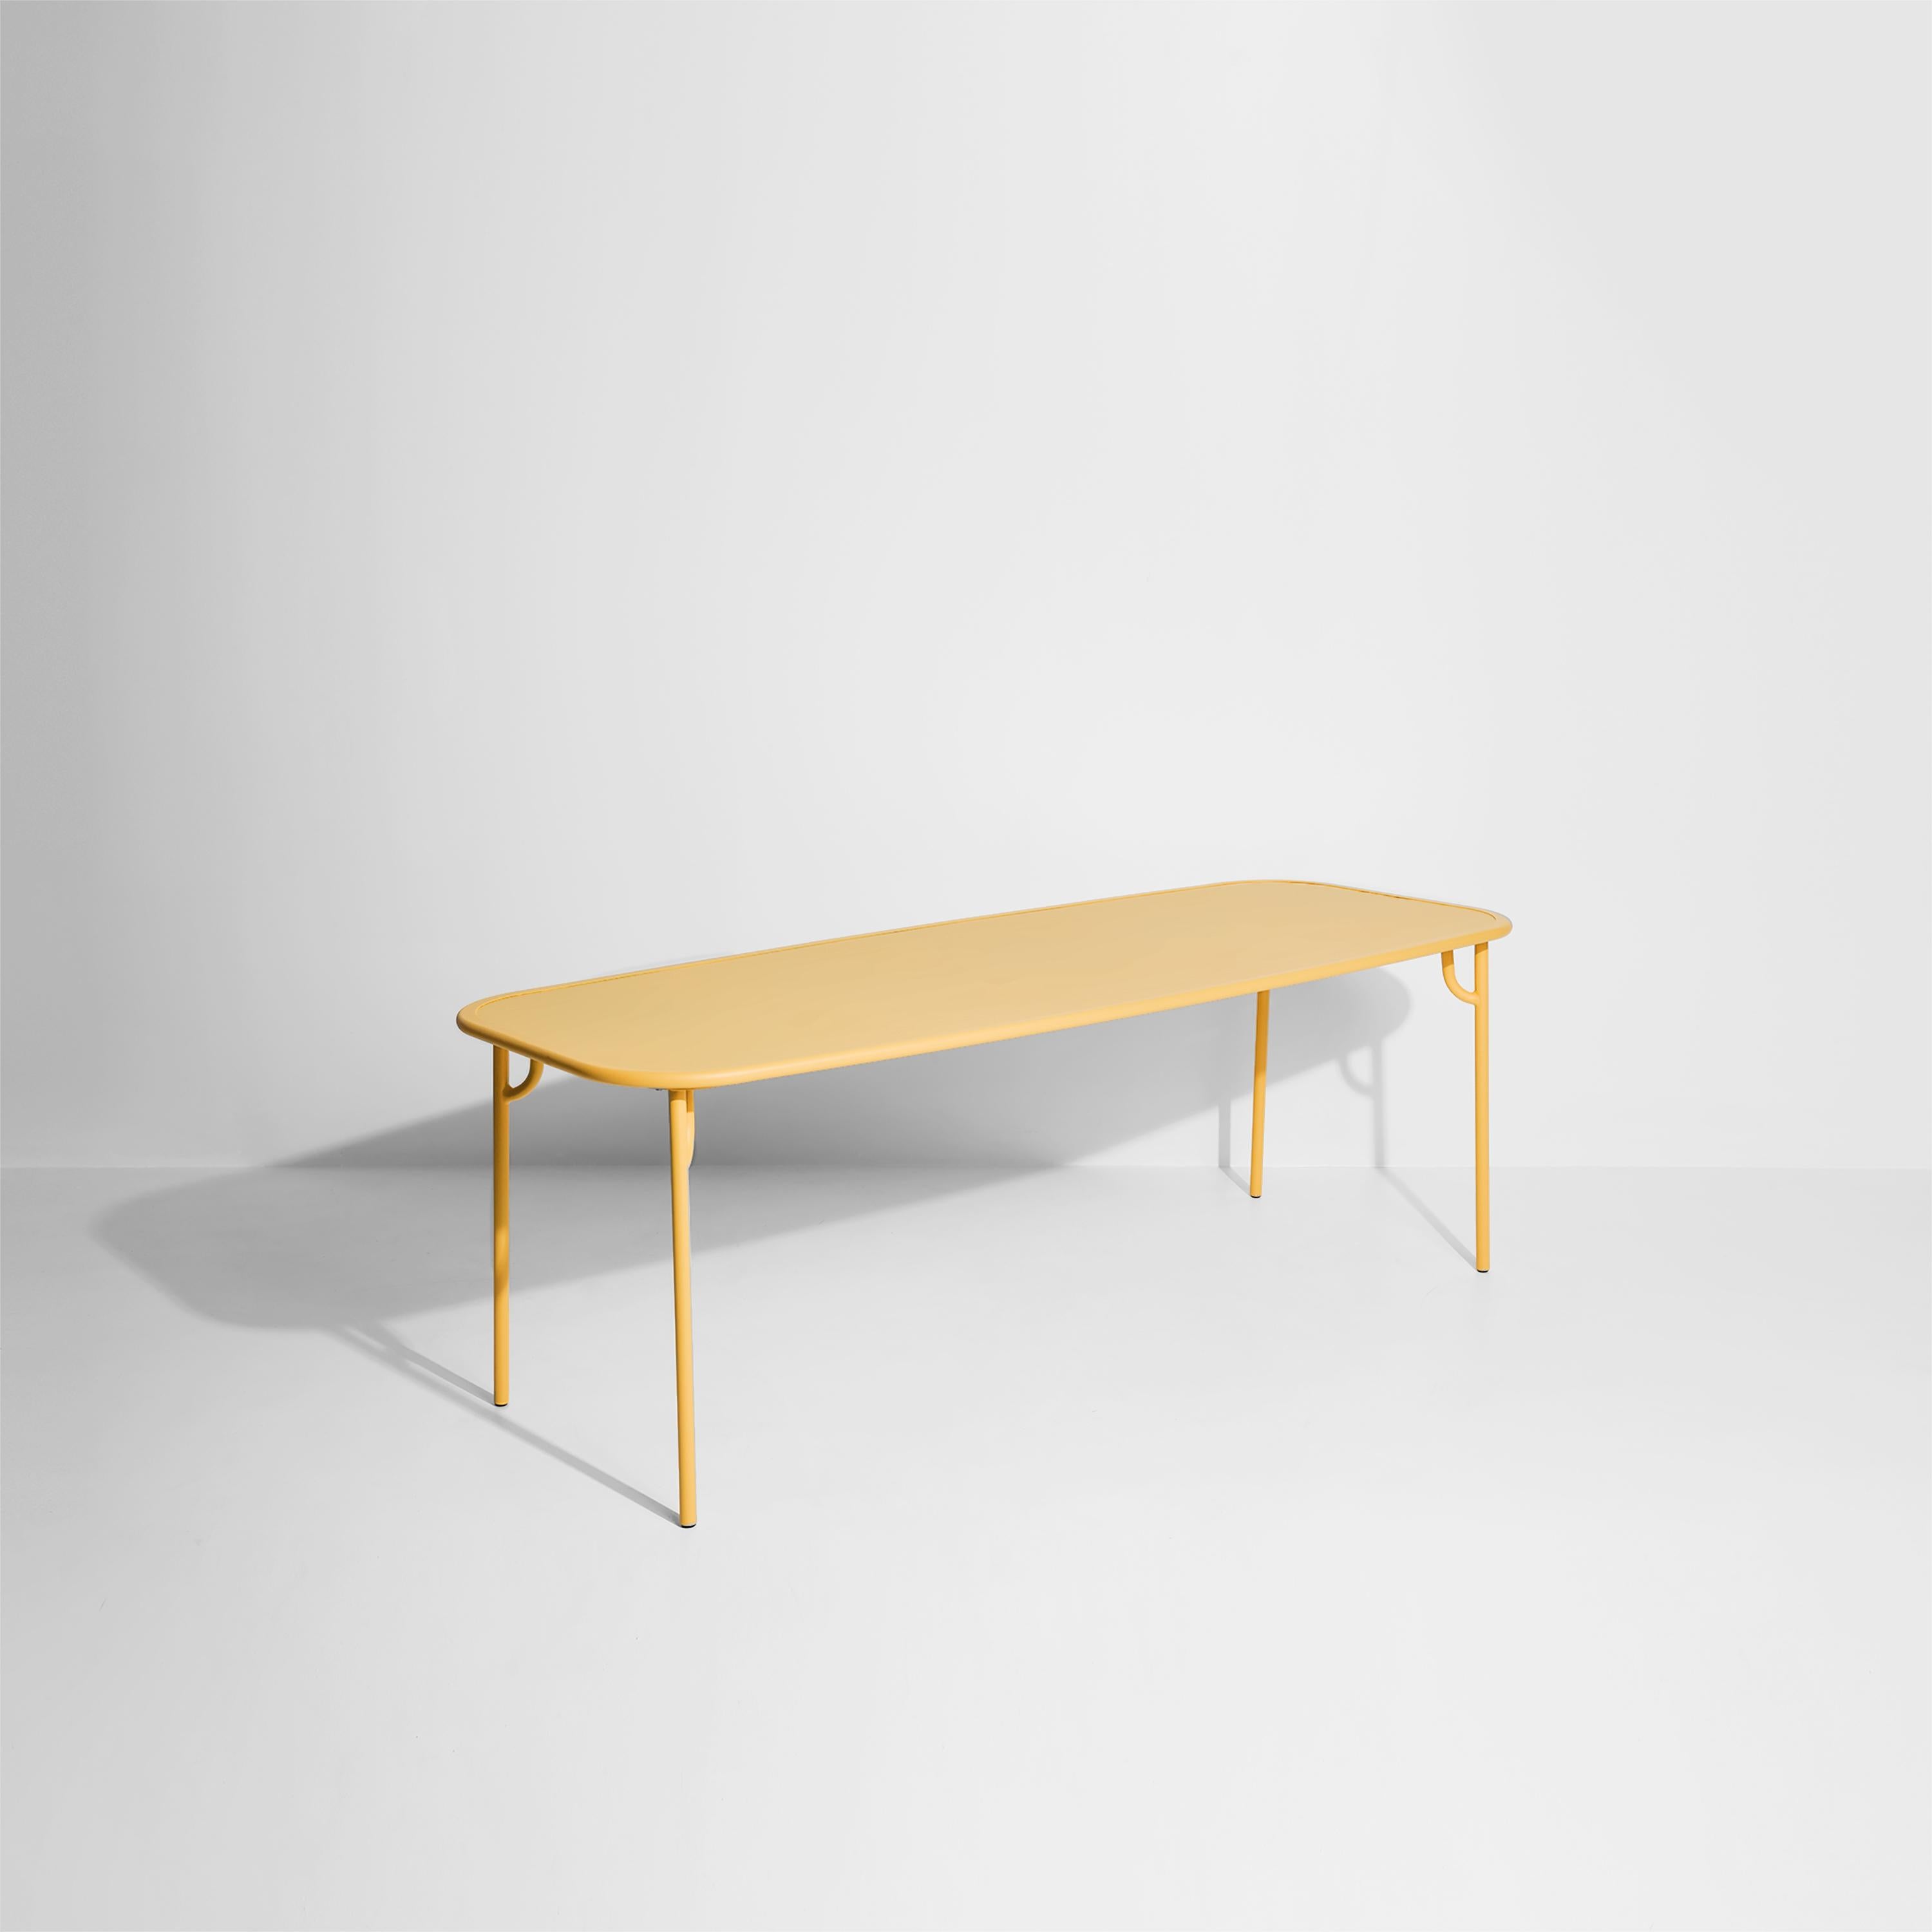 Petite Friture Week-End Large Plain Rectangular Dining Table in Saffron Aluminium by Studio BrichetZiegler, 2017

The week-end collection is a full range of outdoor furniture, in aluminium grained epoxy paint, matt finish, that includes 18